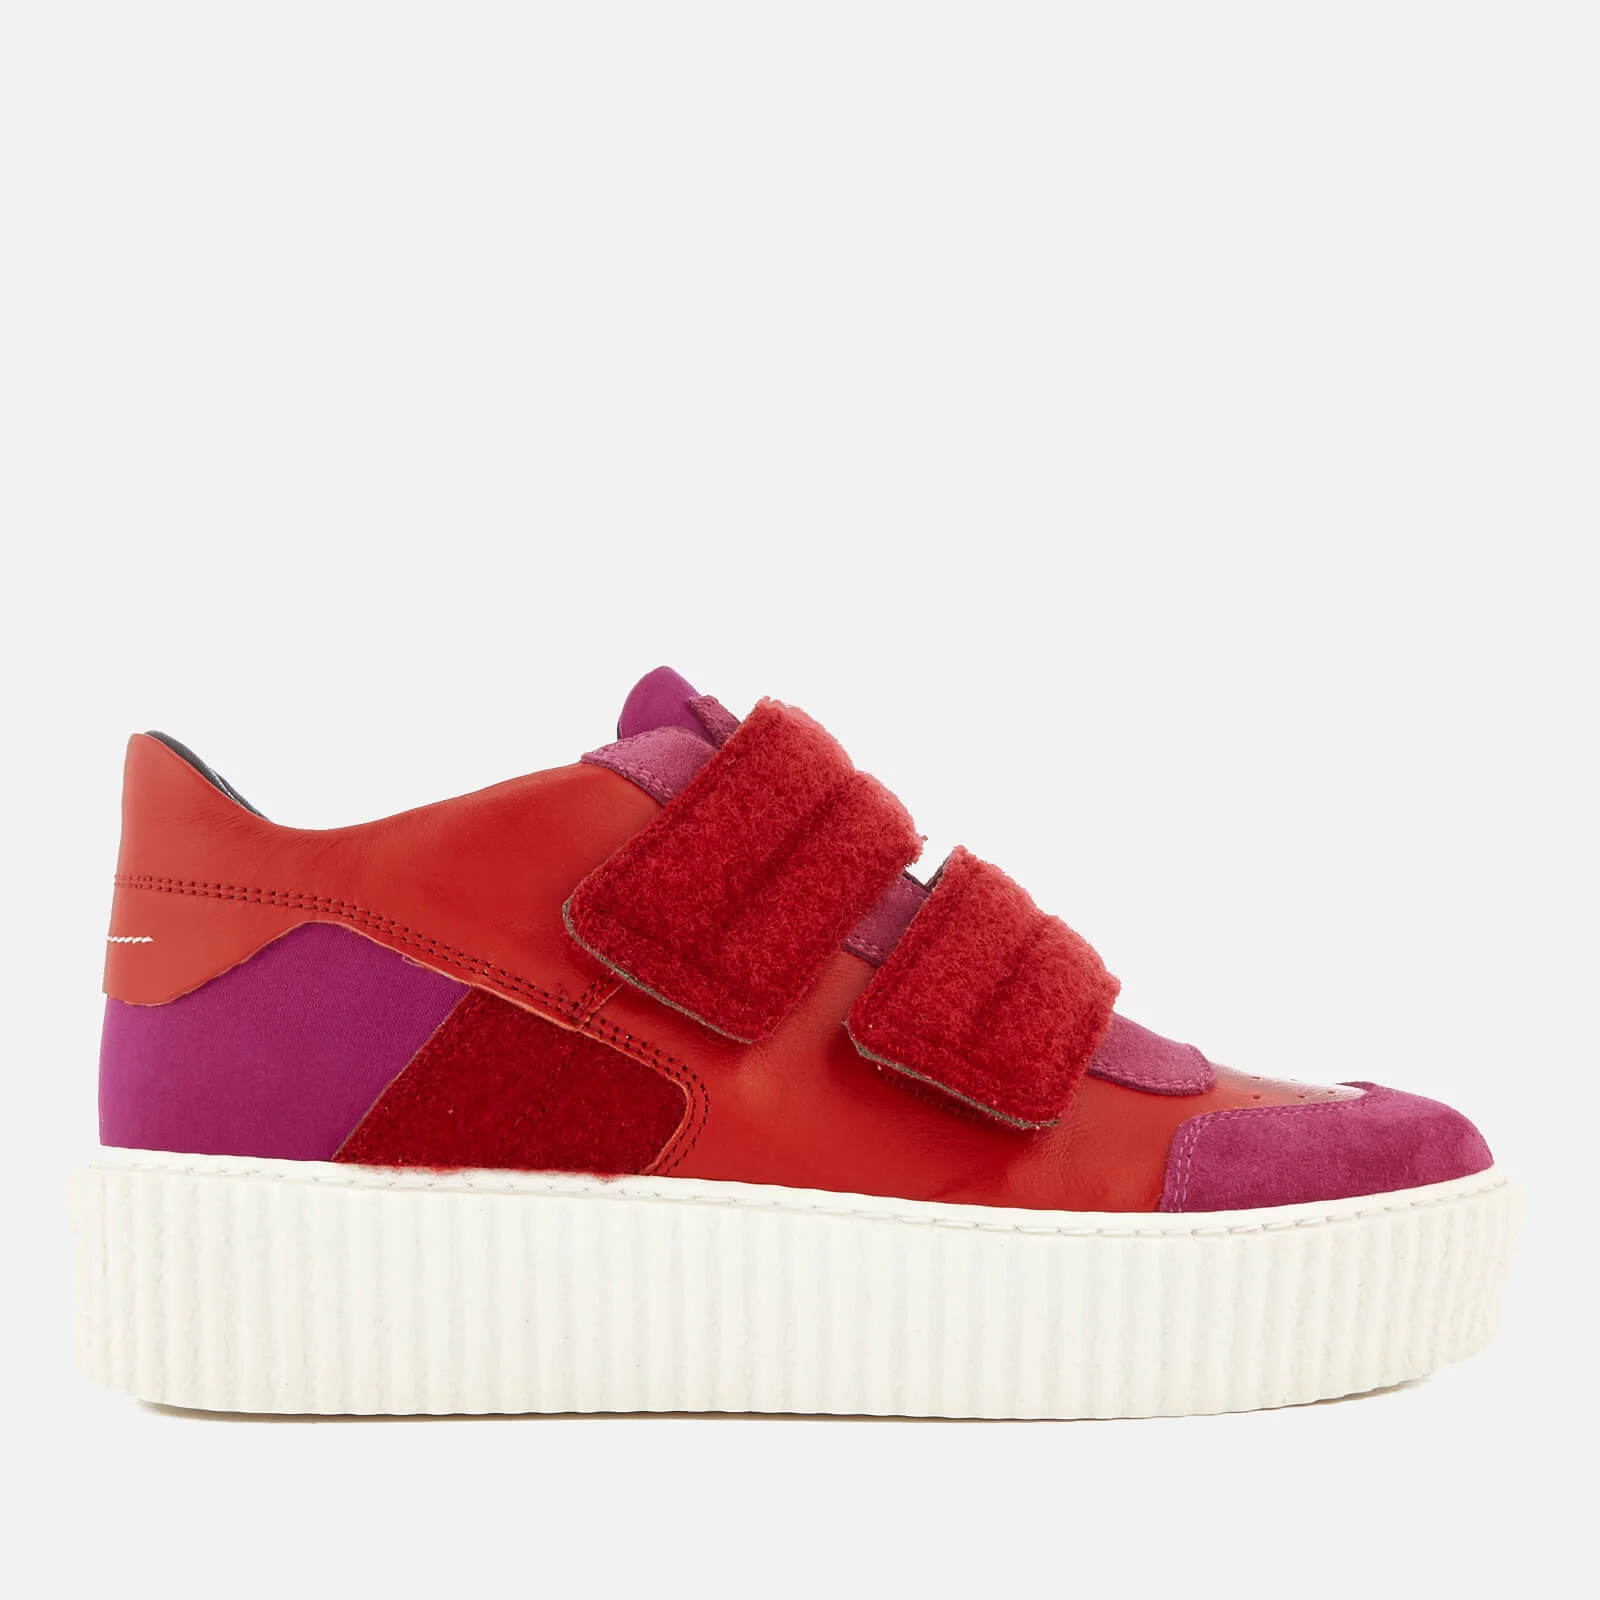 MM6 Maison Margiela Women's Chunky Sole Double Velcro Strap Trainers - Pink/Red Image 1